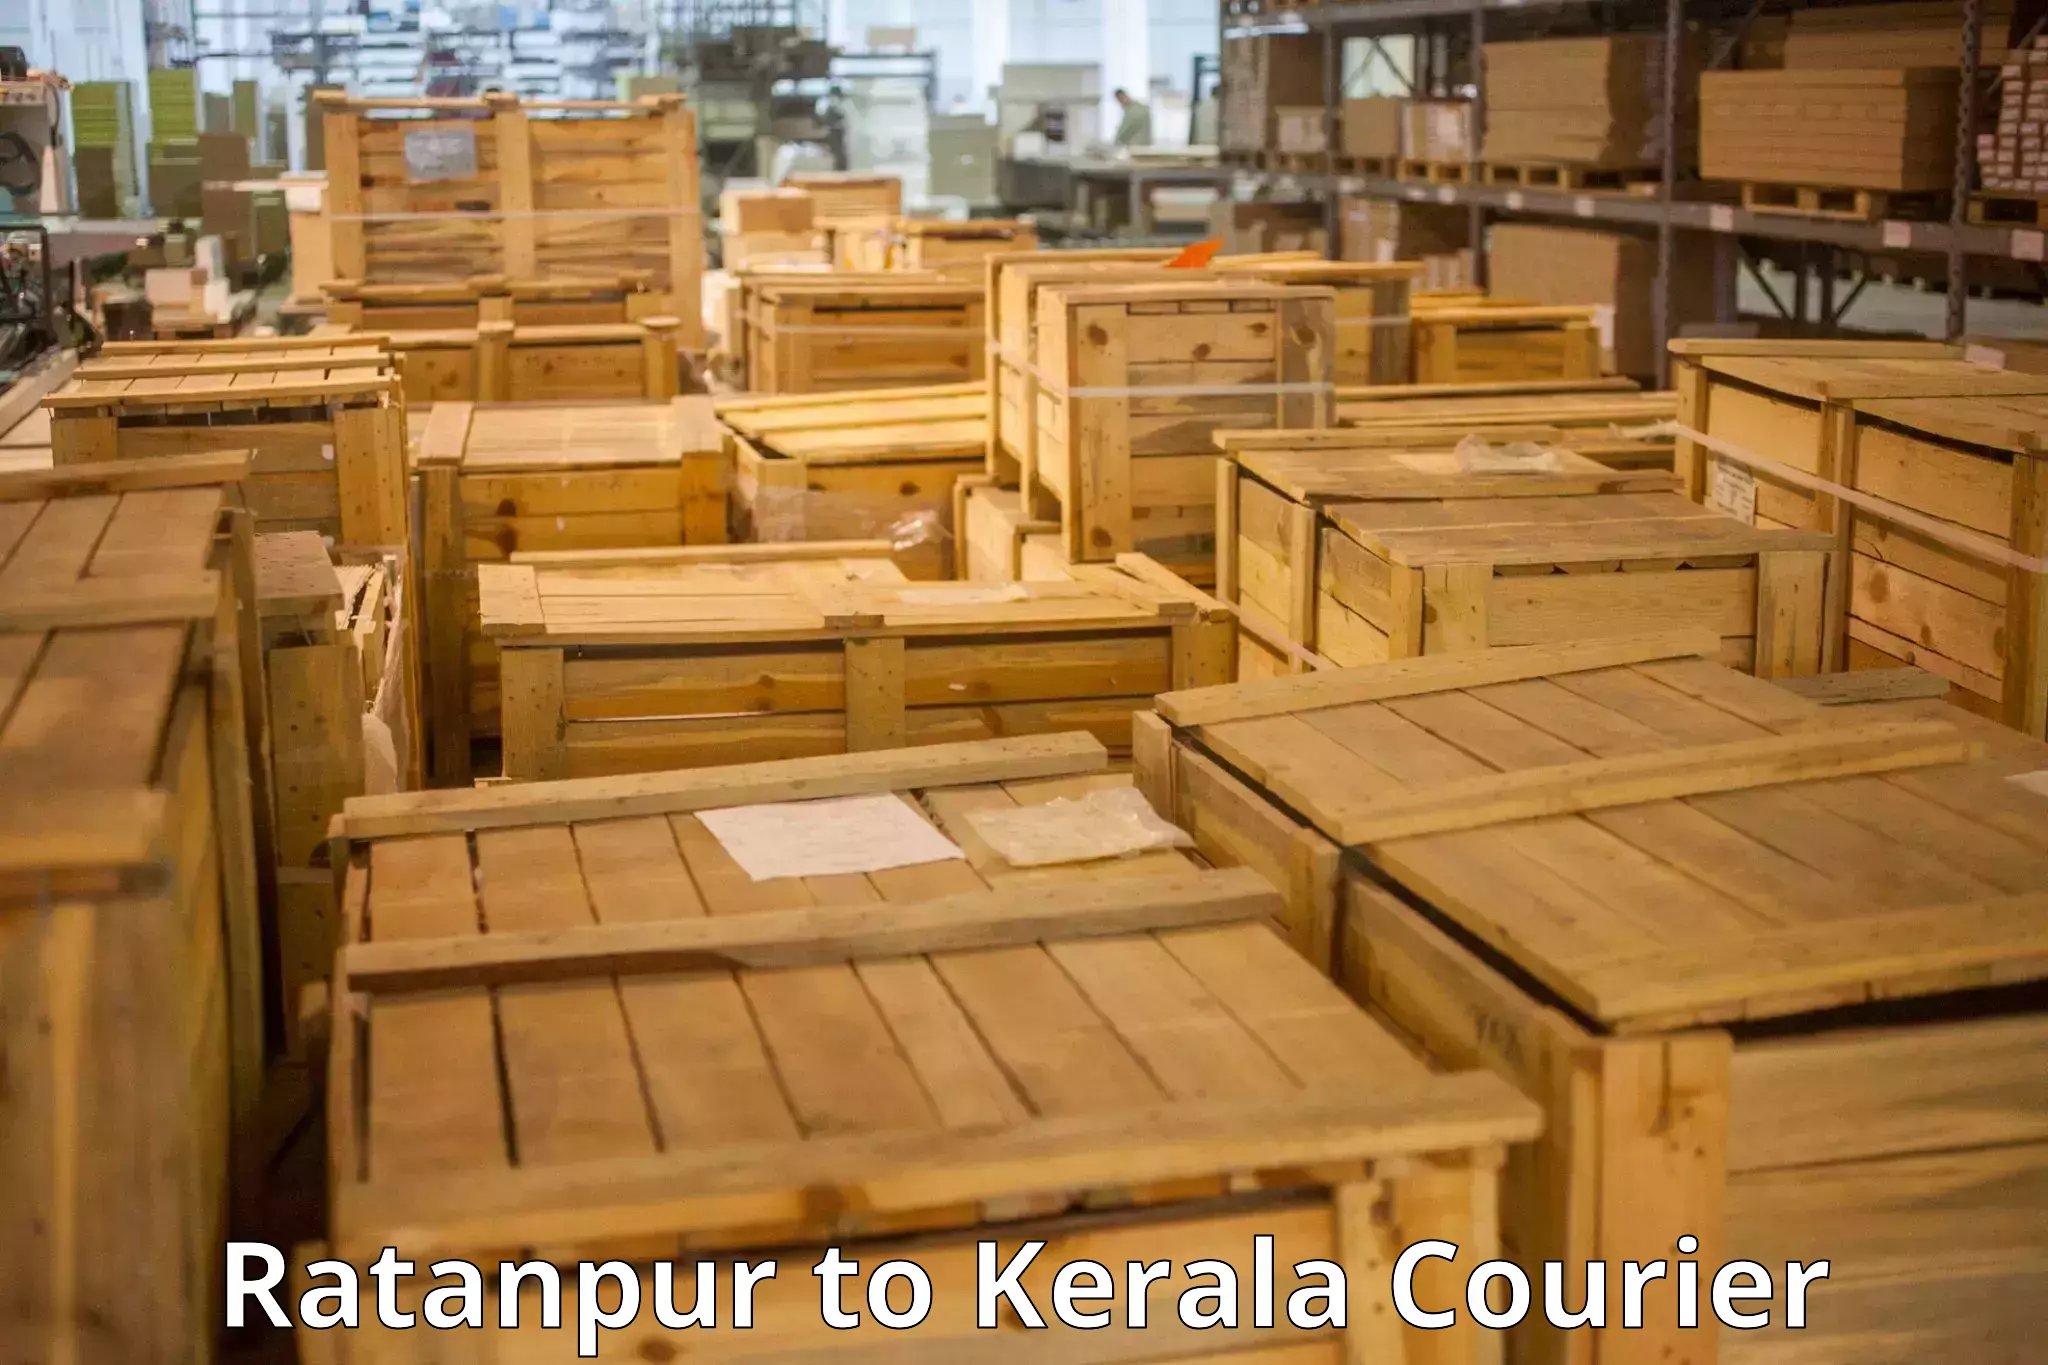 Luggage shipment specialists Ratanpur to Wayanad